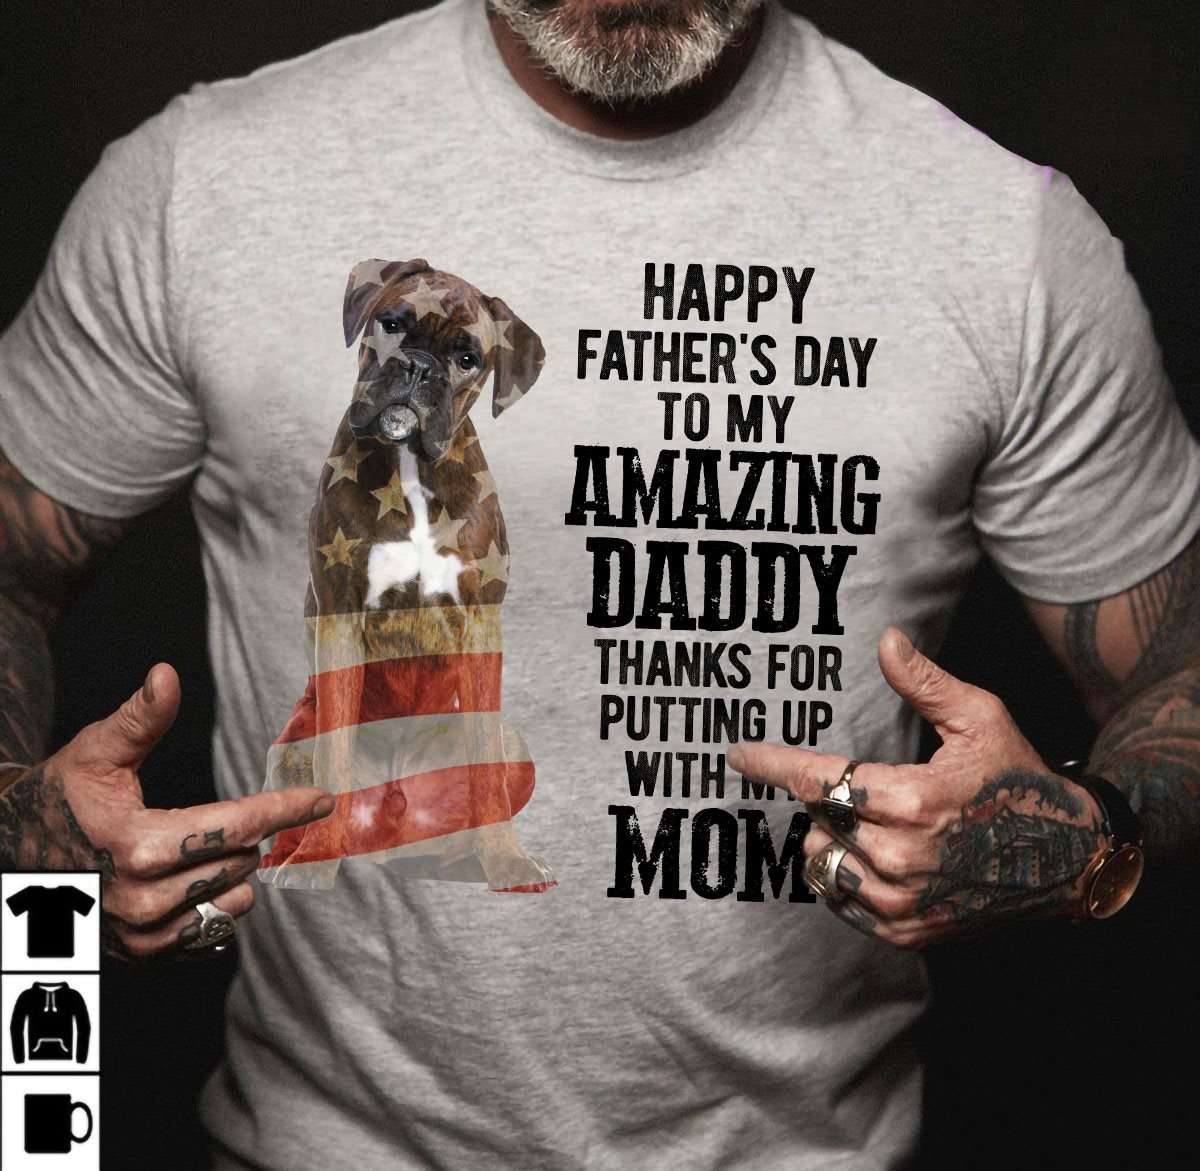 Happy father's day to my amazing daddy thanks for putting up with my mom - Boxer breed dog